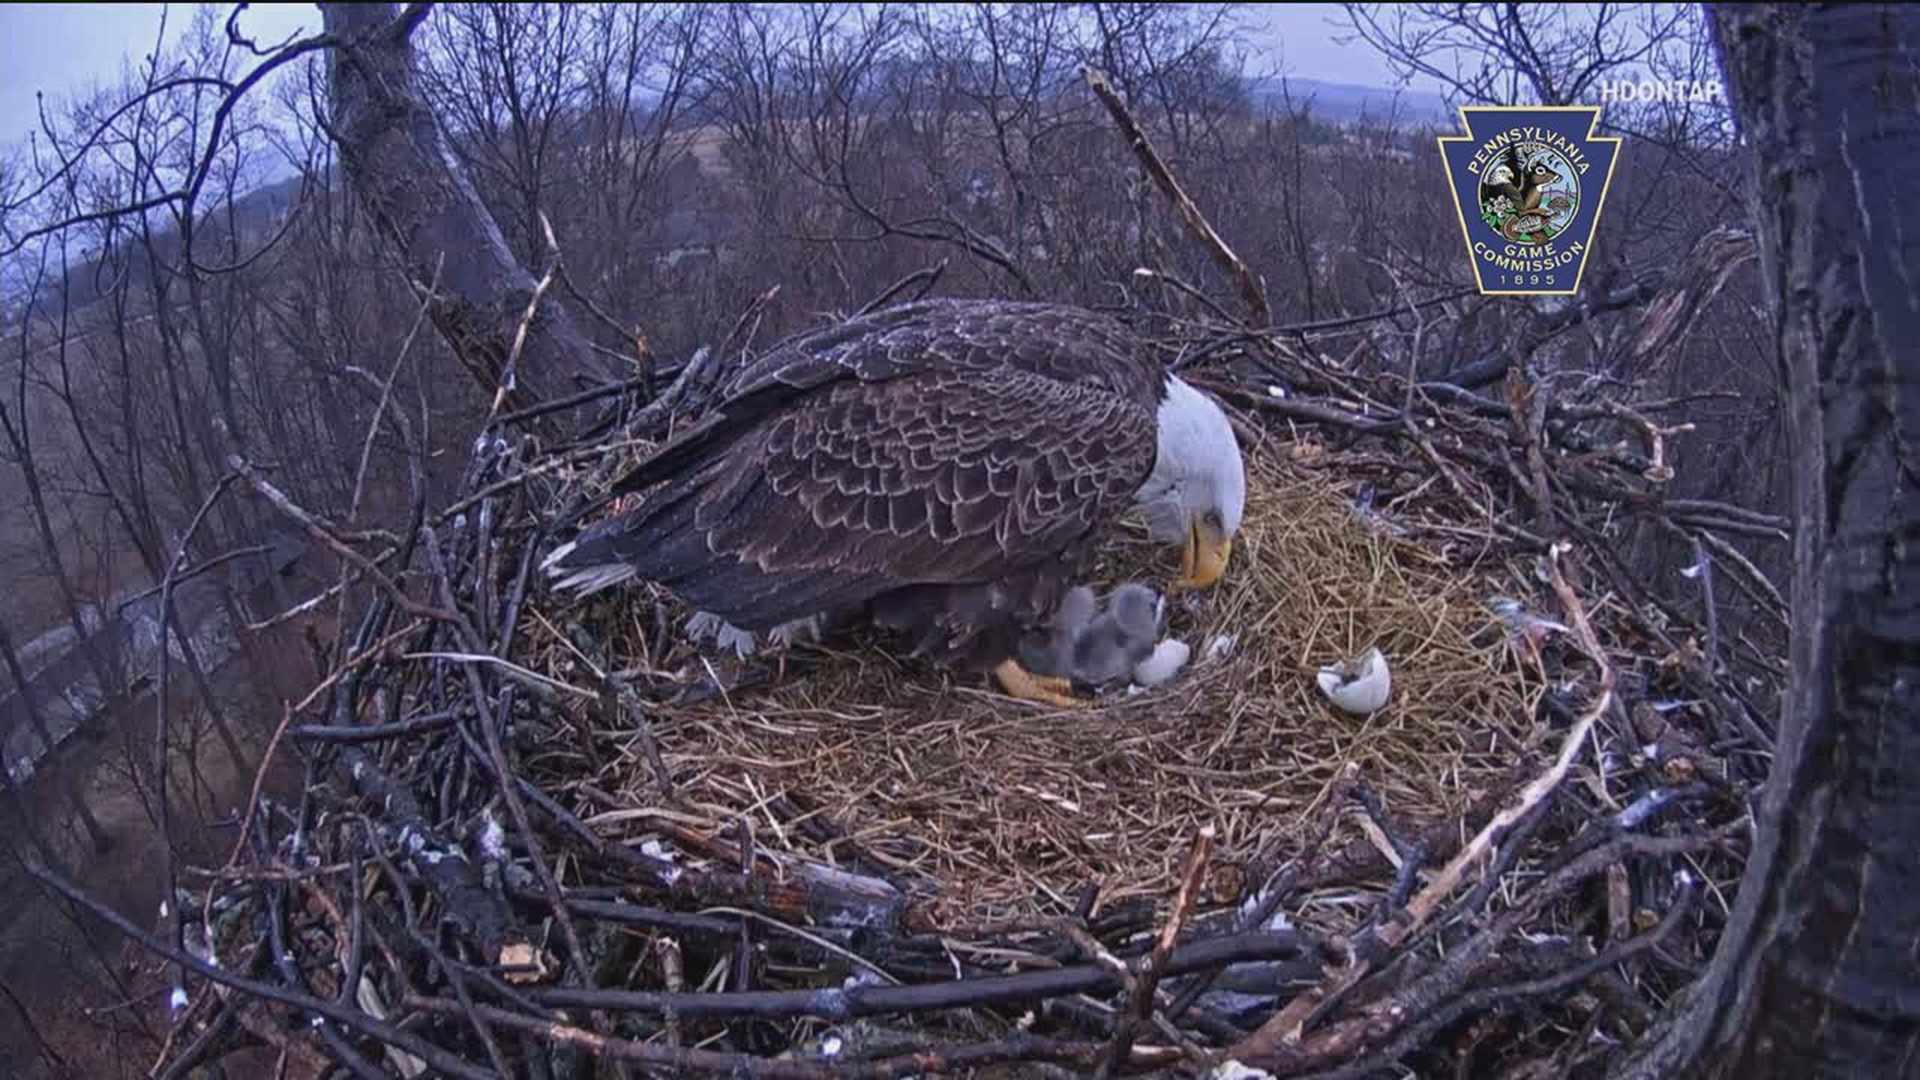 HDOnTap, which runs the Hanover eagle's nest live stream, has started a fundraiser after it discovered the power was cut to its cameras.